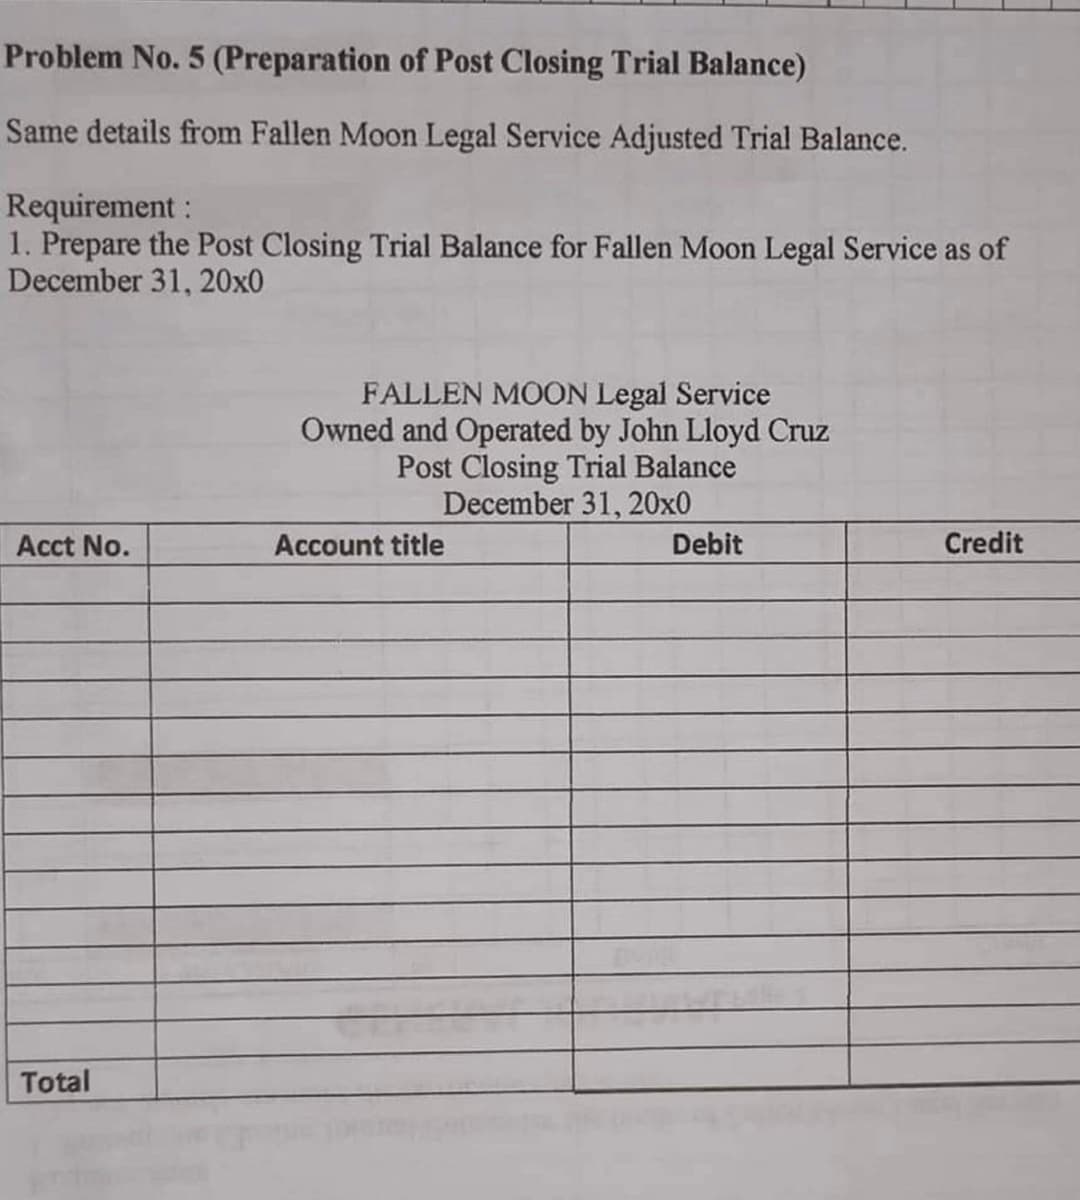 Problem No. 5 (Preparation of Post Closing Trial Balance)
Same details from Fallen Moon Legal Service Adjusted Trial Balance.
Requirement :
1. Prepare the Post Closing Trial Balance for Fallen Moon Legal Service as of
December 31, 20x0
FALLEN MOON Legal Service
Owned and Operated by John Lloyd Cruz
Post Closing Trial Balance
December 31, 20x0
Acct No.
Account title
Debit
Credit
Total
